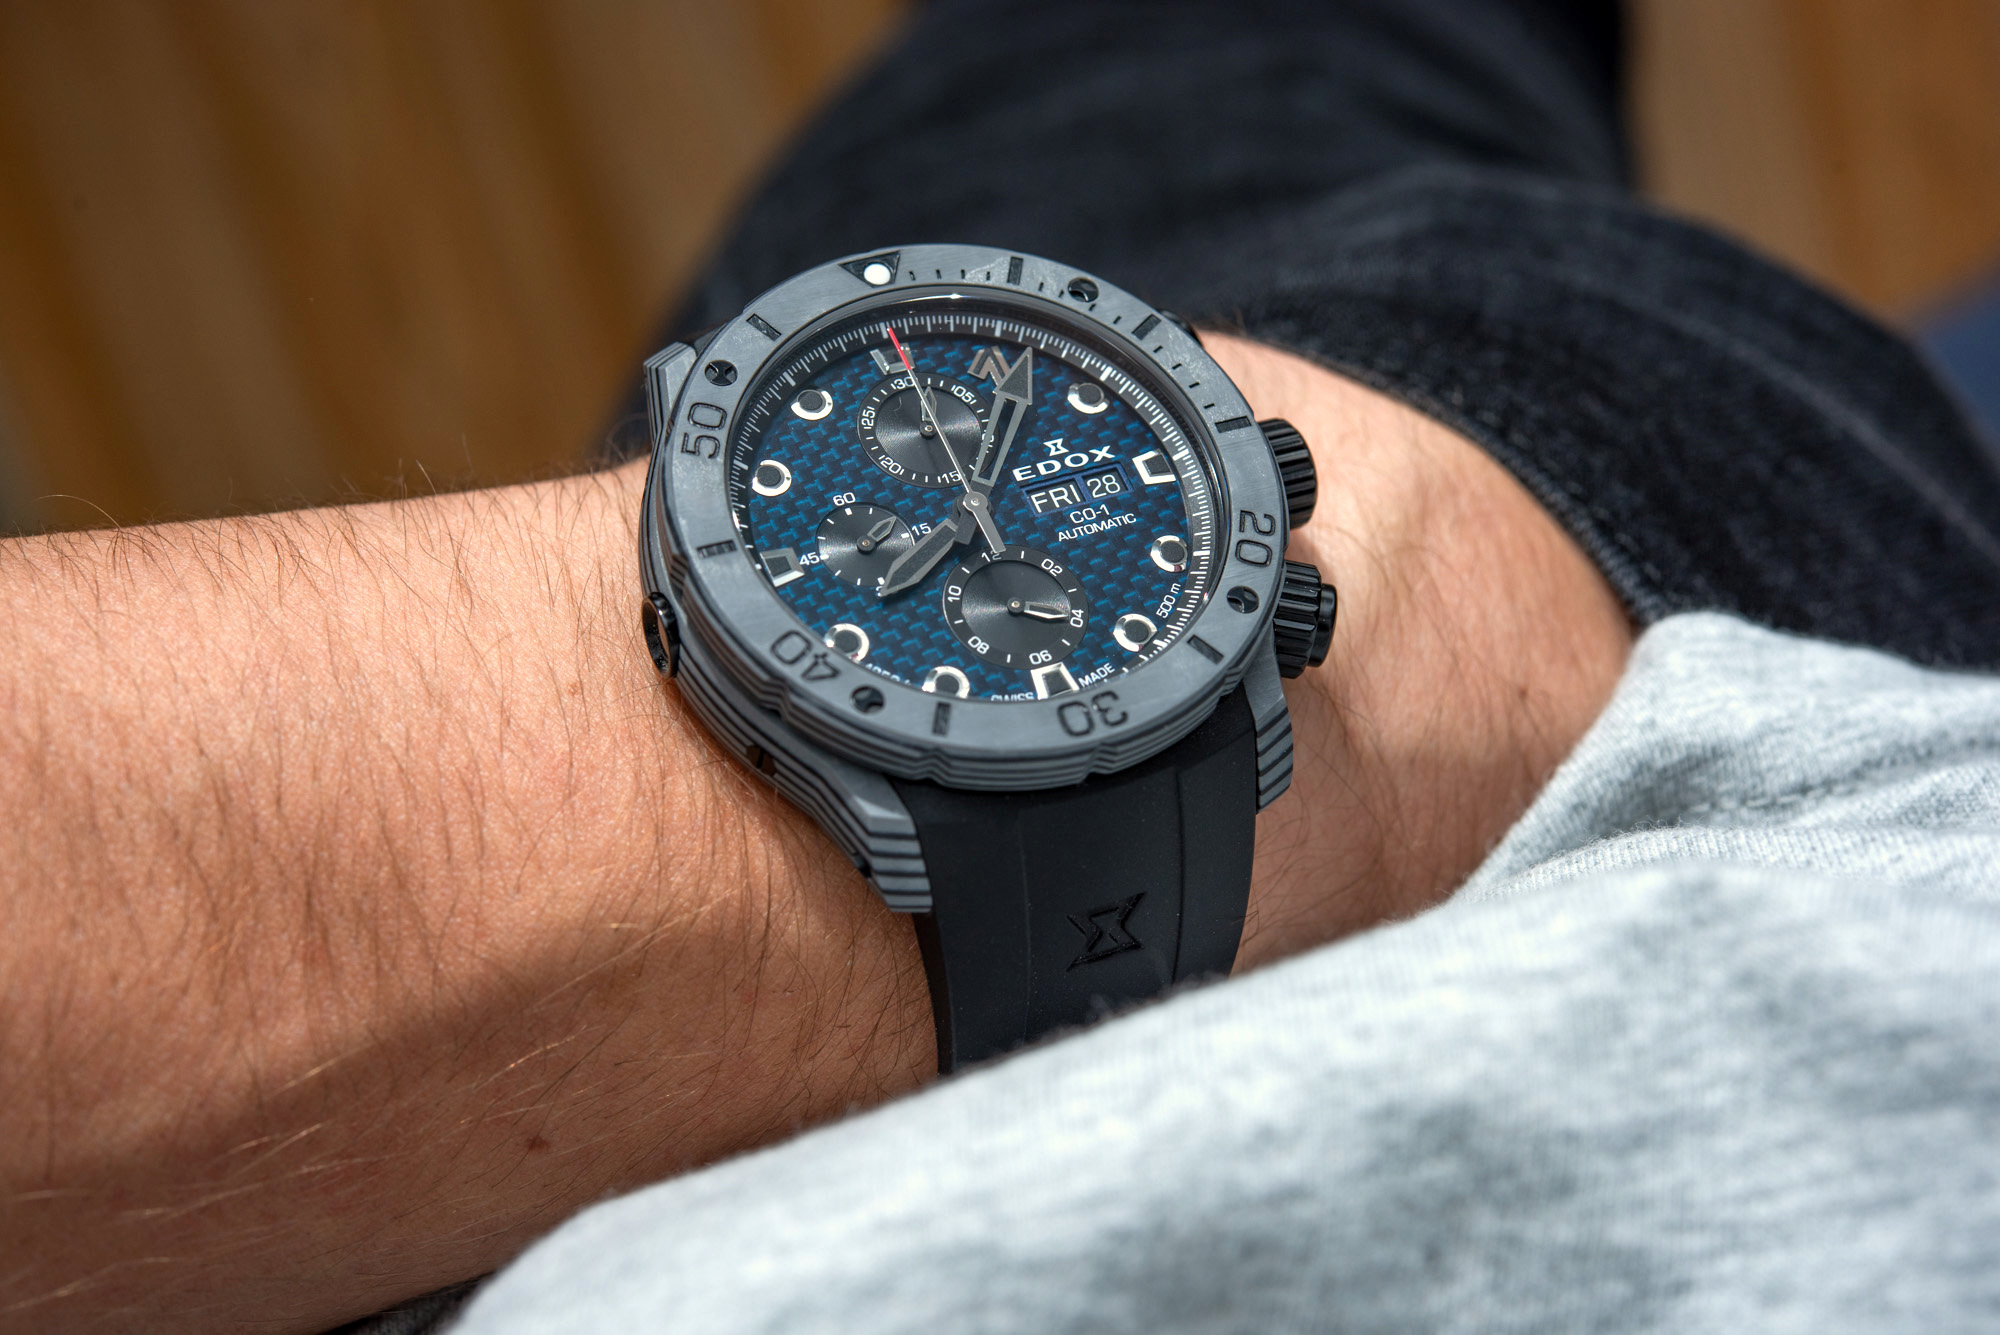 Watch Review: Edox CO-1 Carbon Chronograph